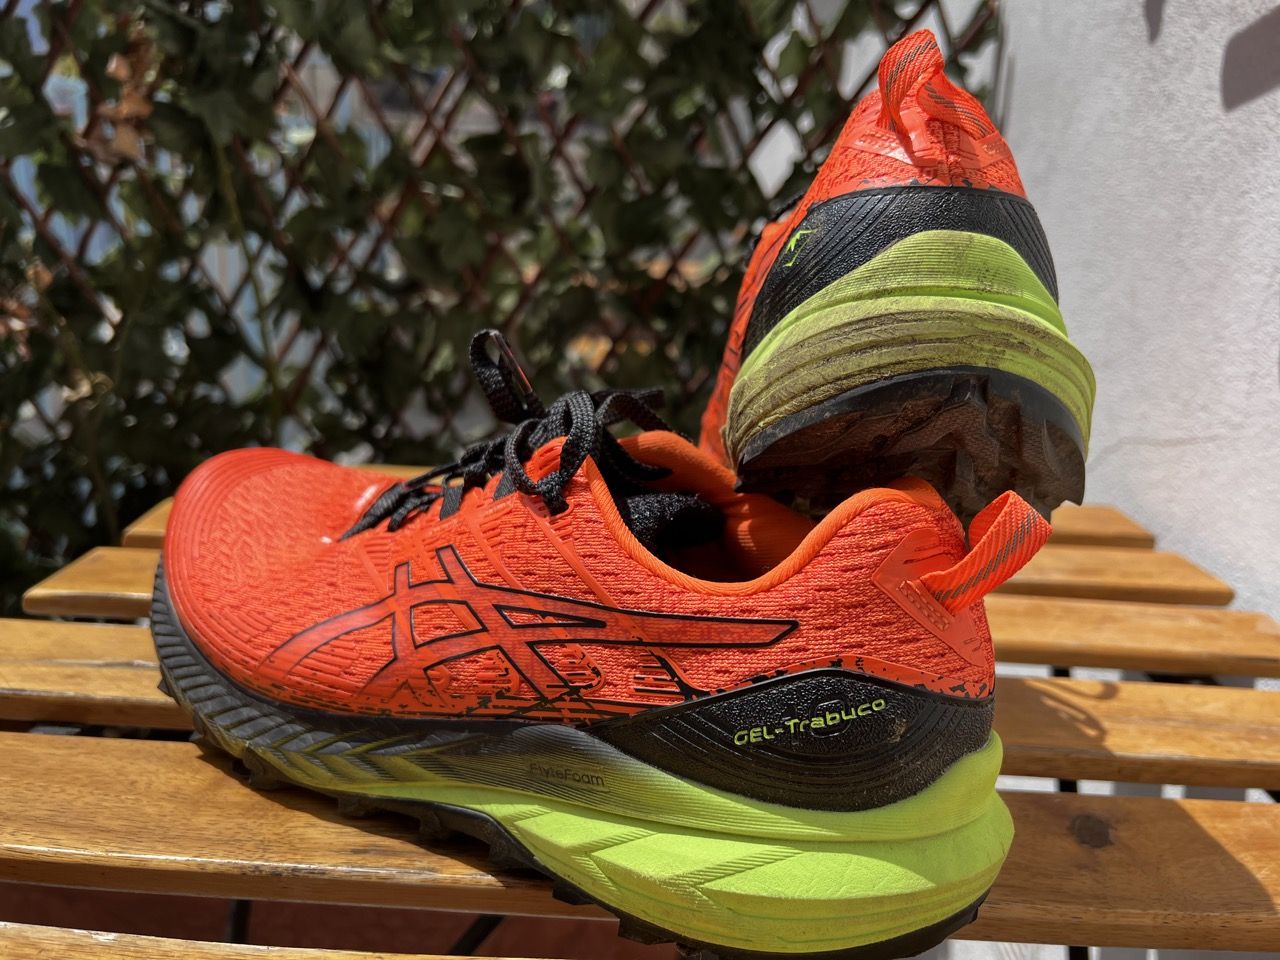 Agrícola gemelo capa ASICS FrontRunner - The Tried & Tested ASICS GEL-FujiTrabuco 10 Review